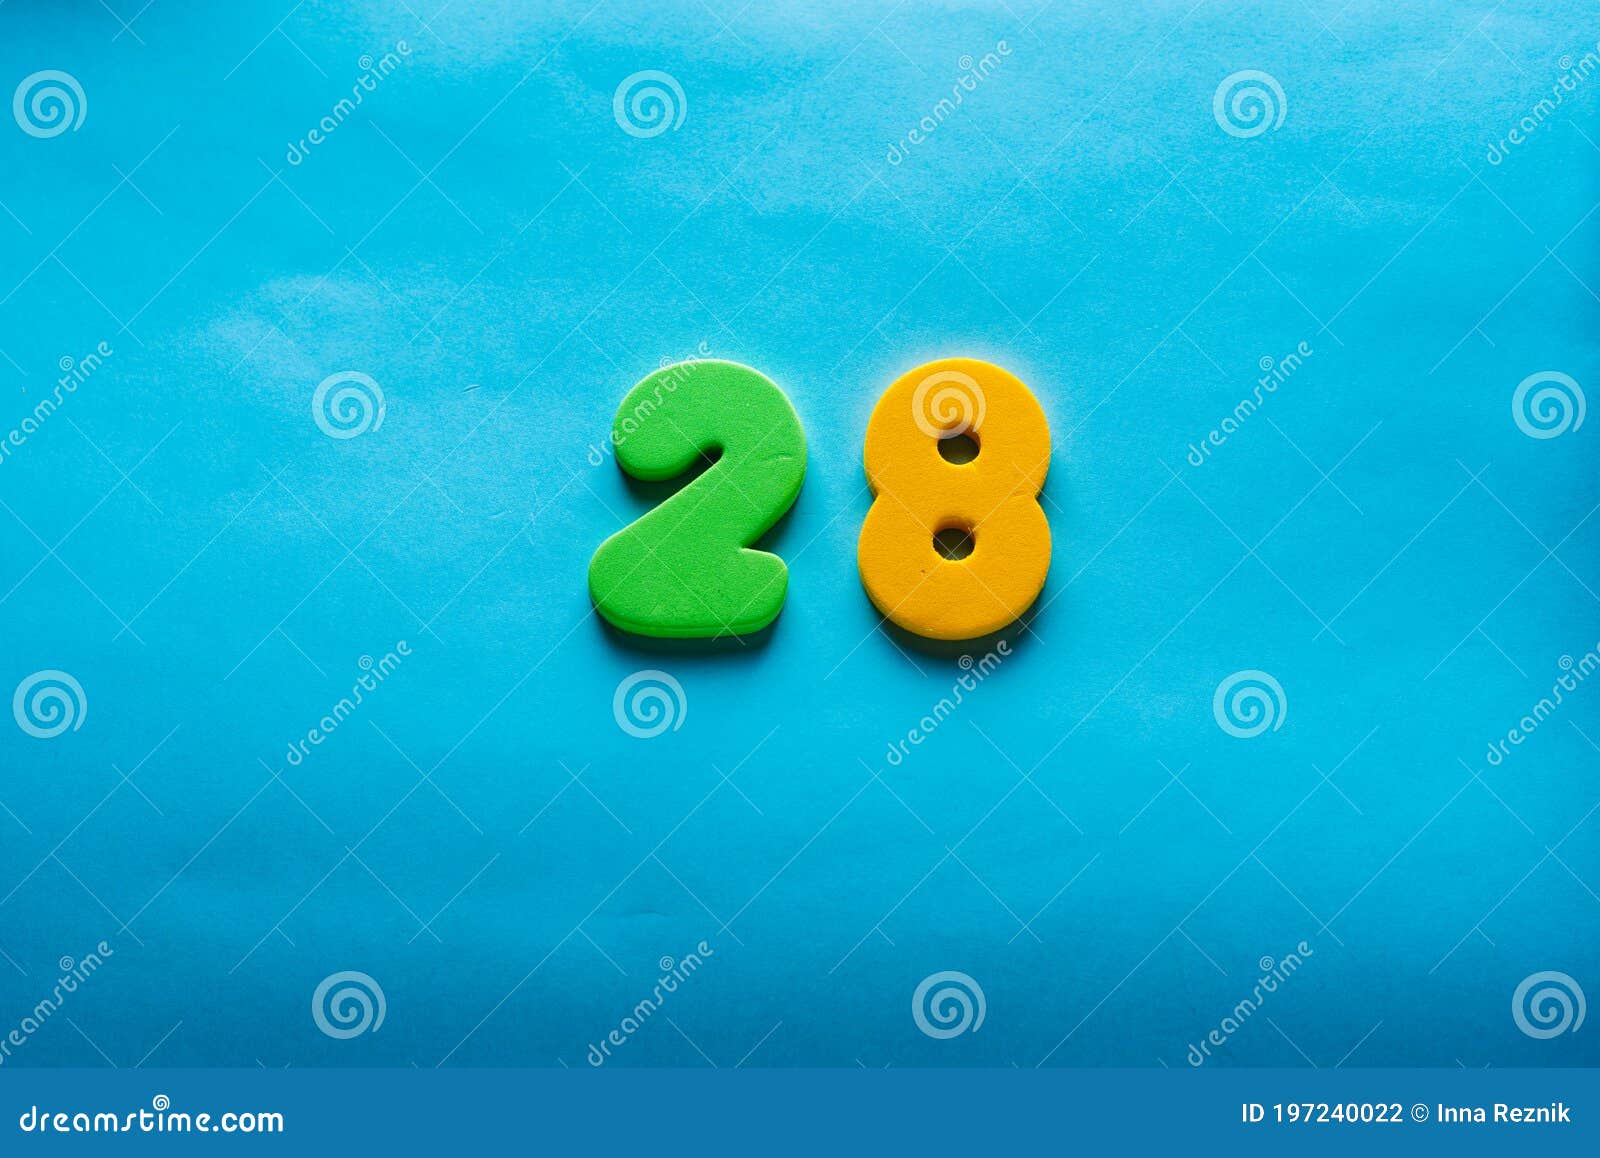 Number on a Bright Blue Background. Stock Photo - Image of blank ...